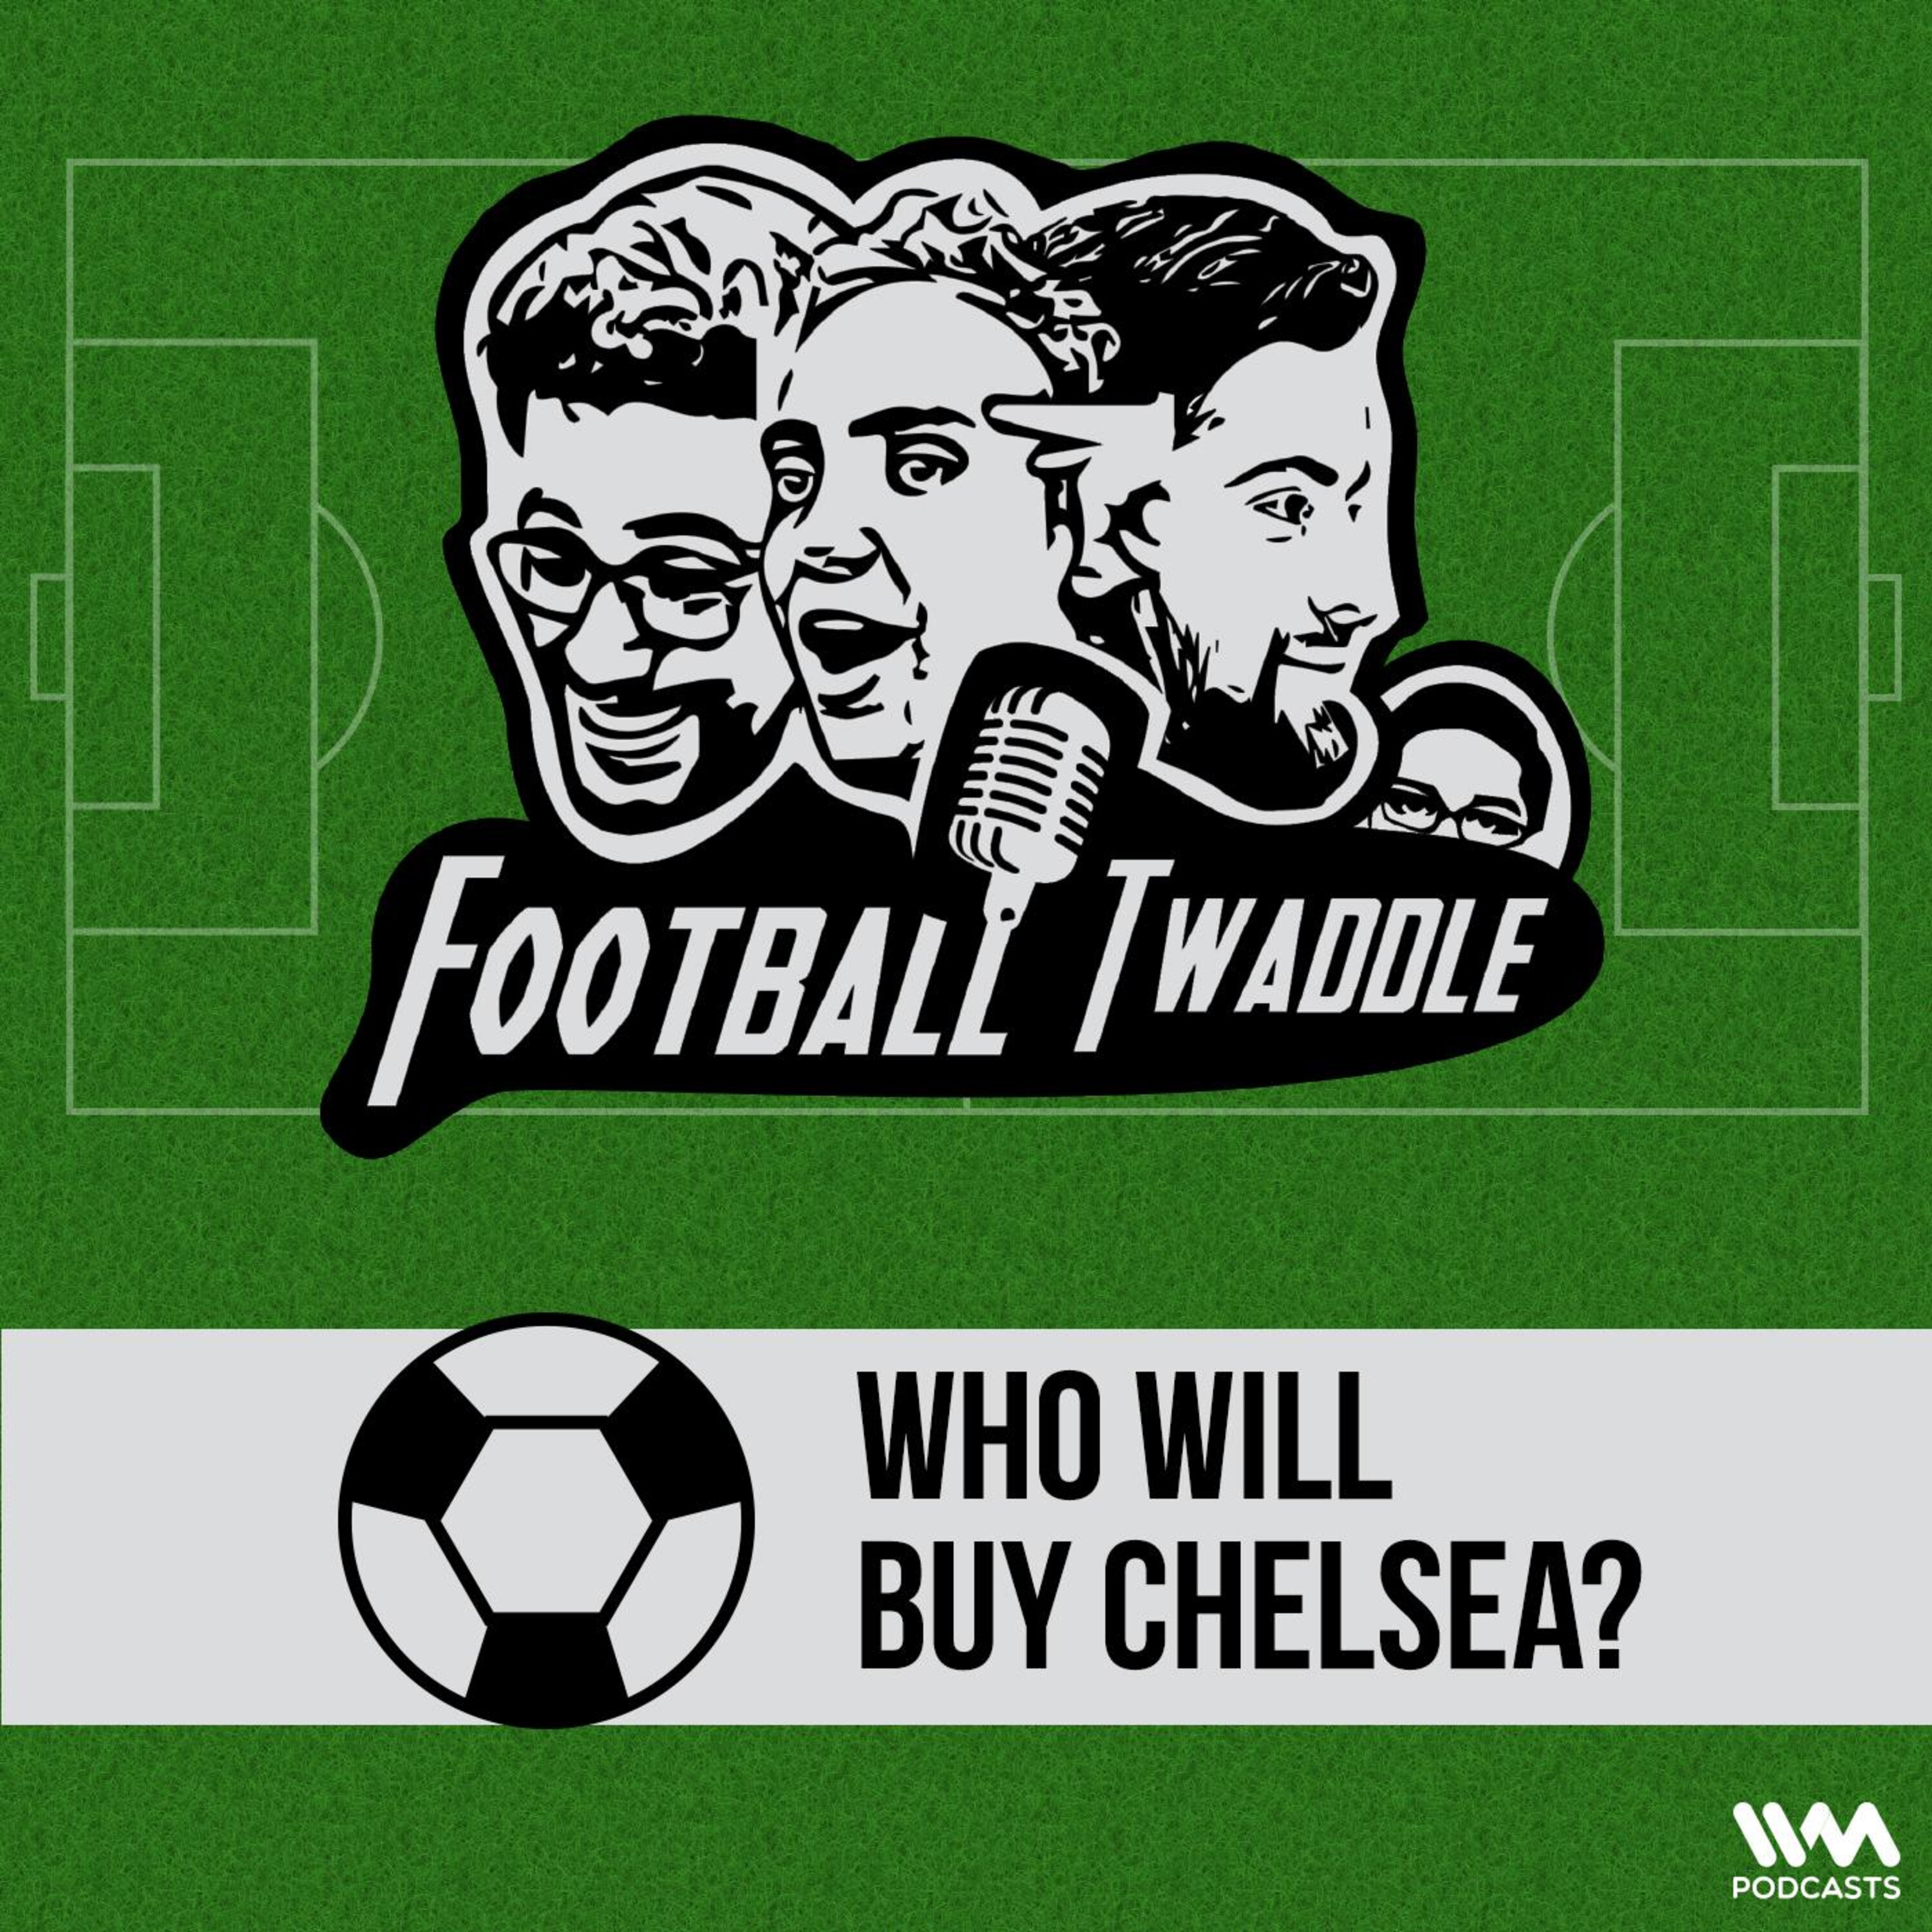 Who Will Buy Chelsea?